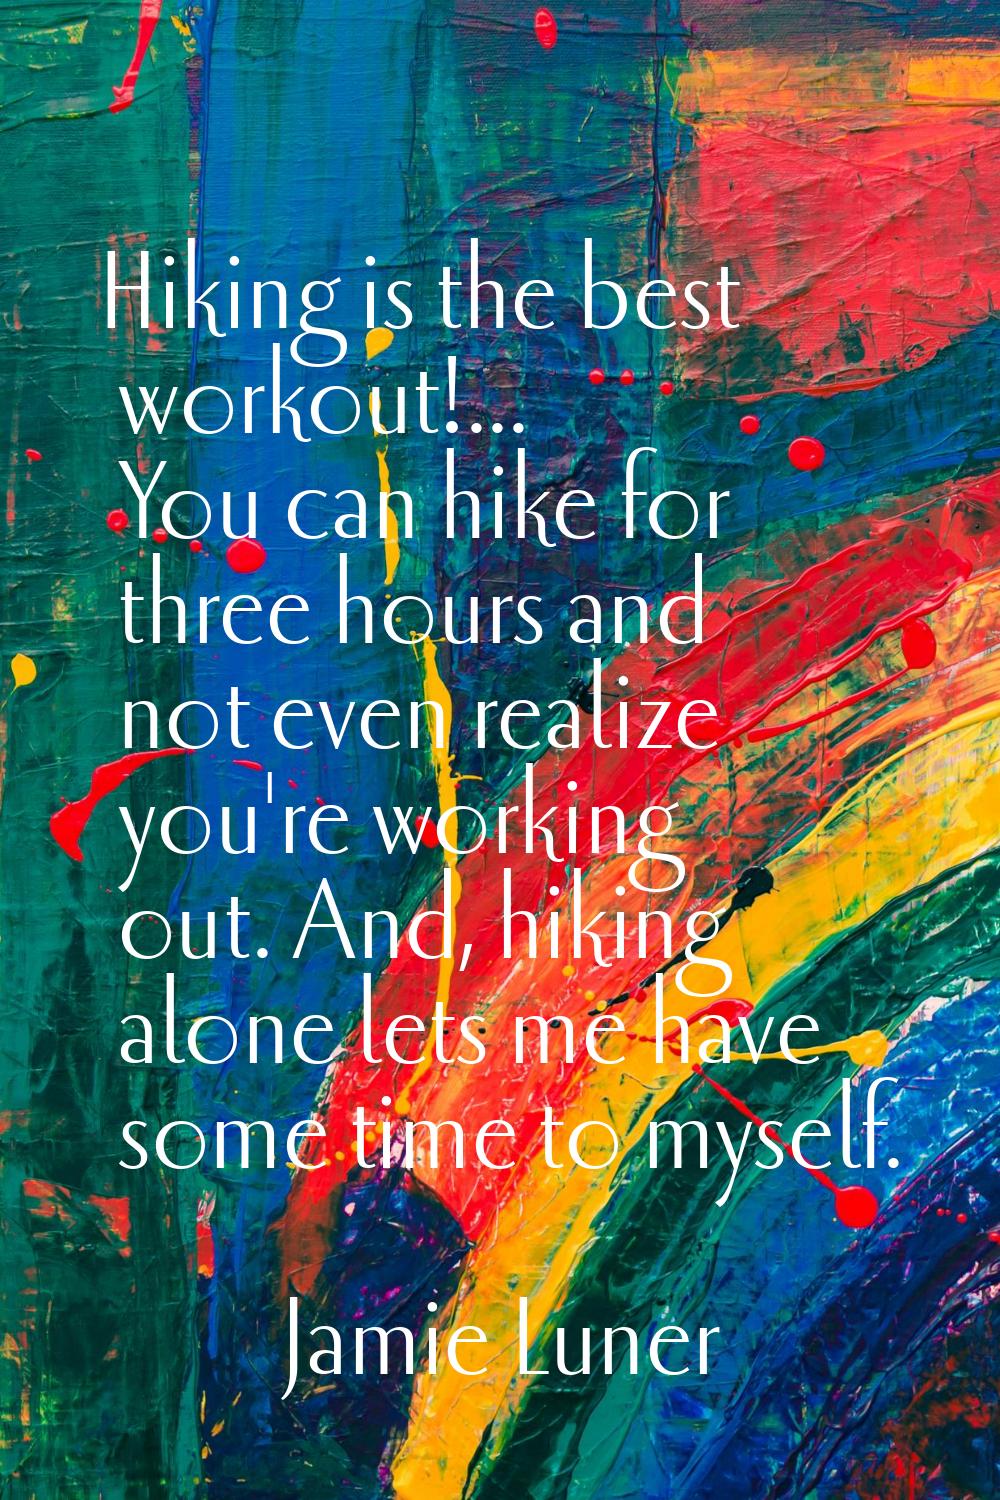 Hiking is the best workout!... You can hike for three hours and not even realize you're working out